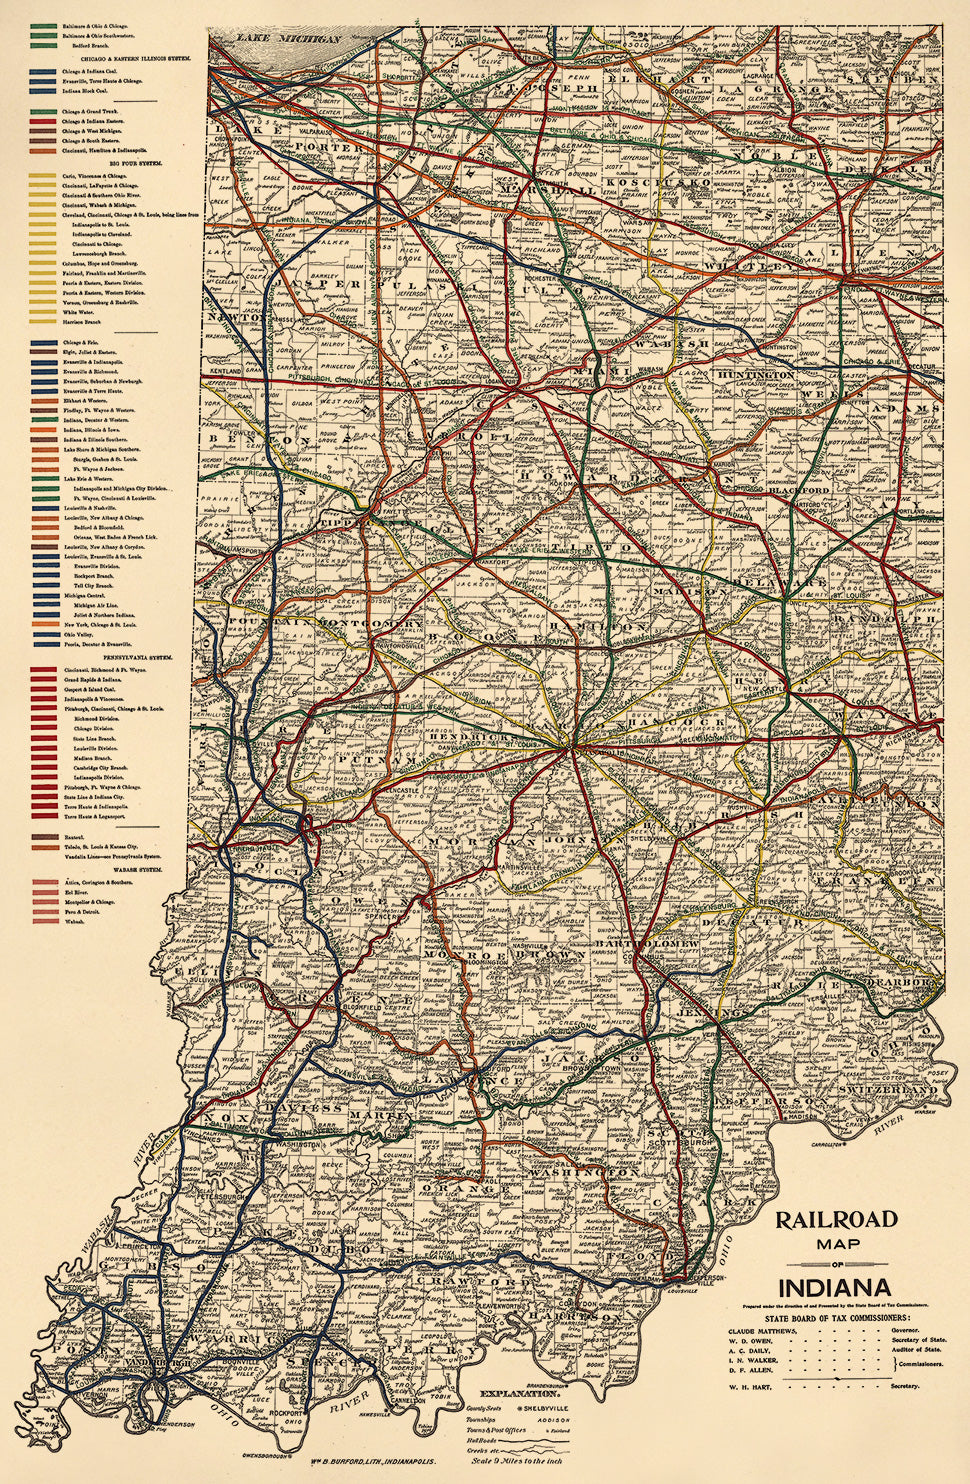 Railroad Map of Indiana in 1896